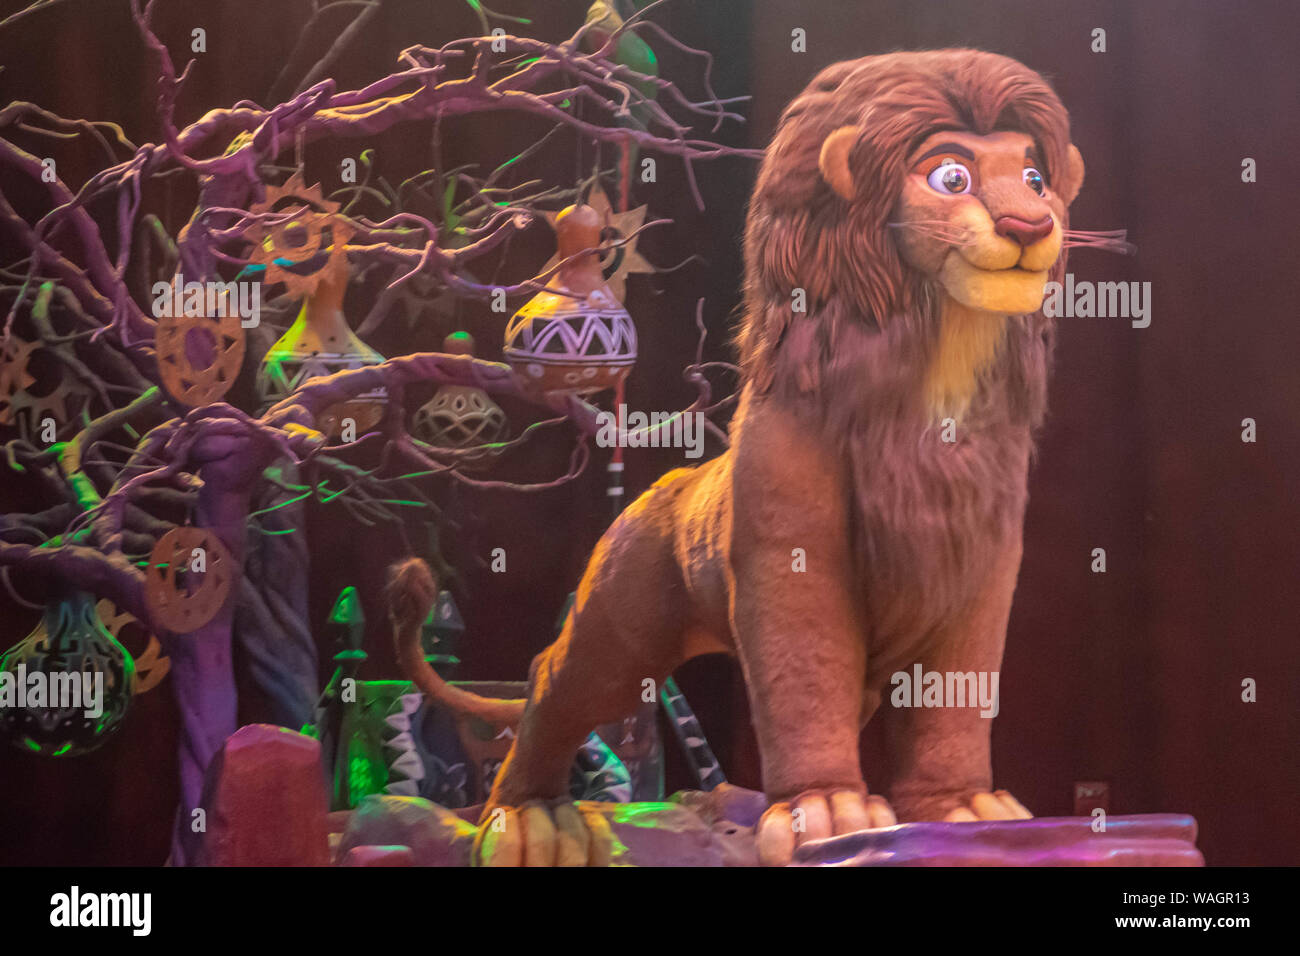 Orlando, Florida. August 14, 2019. Simba in Festival of the Lion King at Animal Kingdom (2). Stock Photo